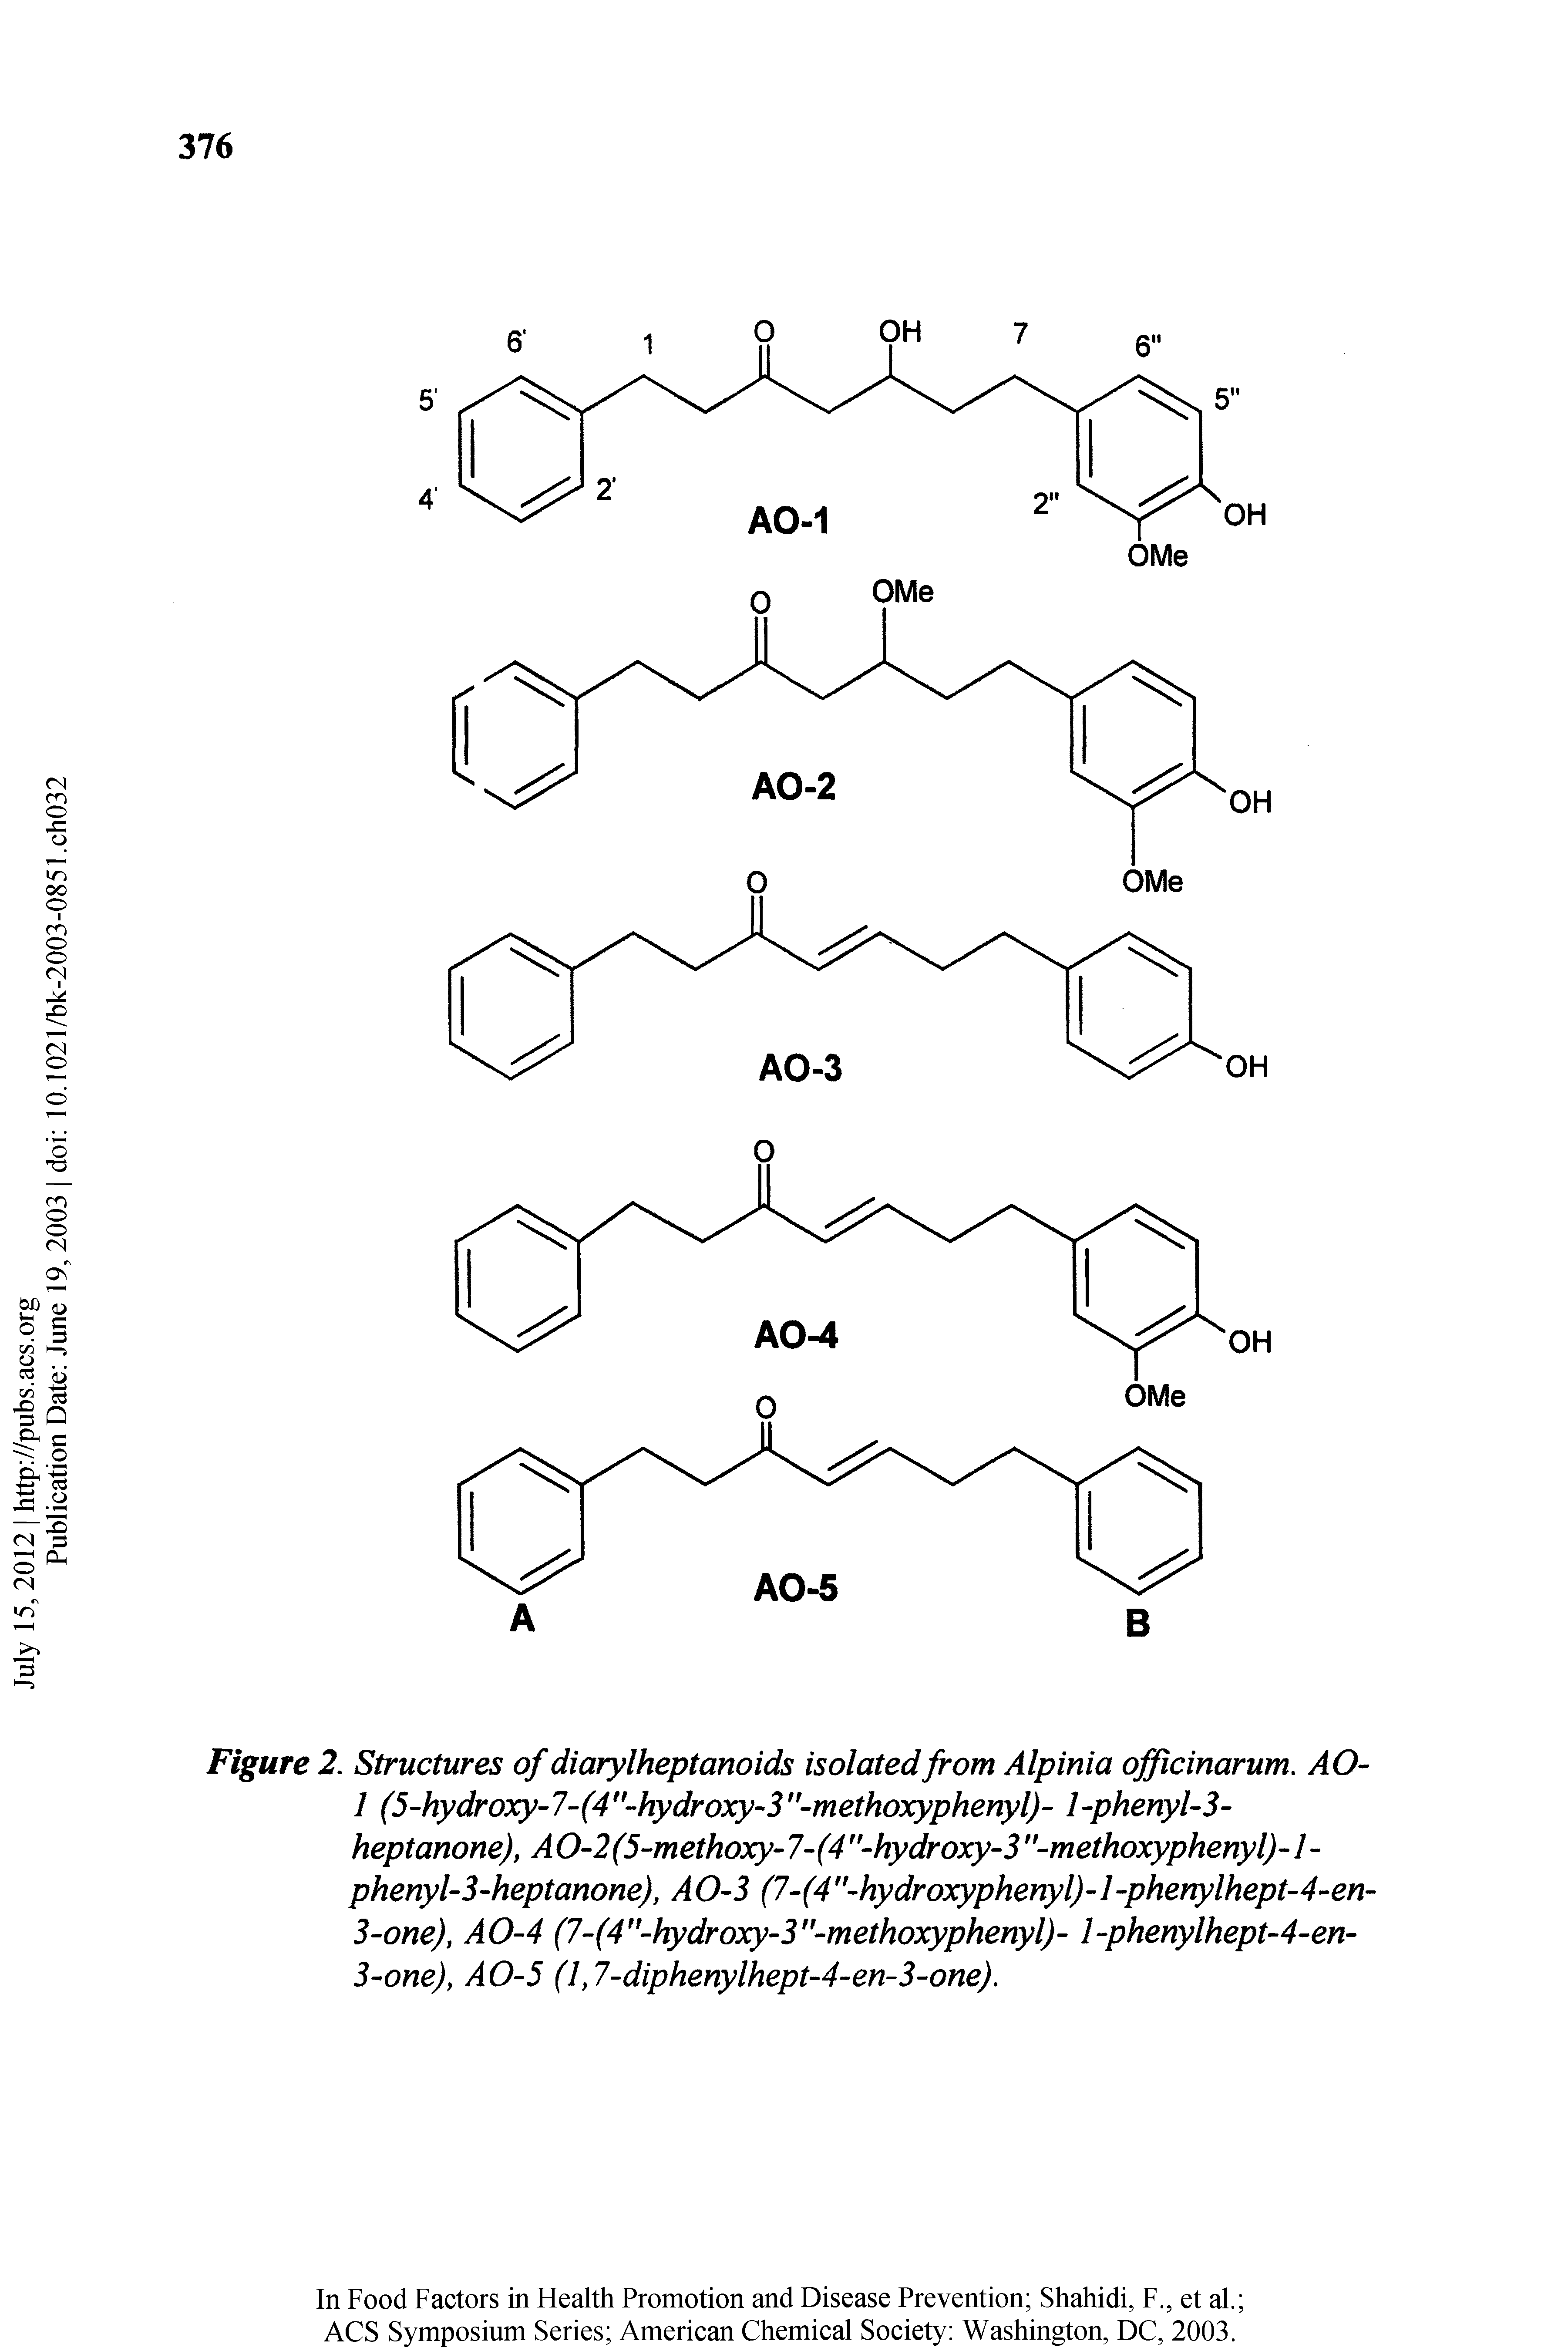 Figure 2. Structures of diarylheptanoids isolated from Alpinia officinarum. AO-1 (5-hydroxy-7-(4 -hydroxy-3 -methoxyphenyl)- l-phenyl-3-heptanone), AO-2(5-methoxy-7-(4 -hydroxy-3 -methoxyphenyl)-l-phenyl-3-heptanone), AO-3 (7-(4 -hydroxyphenyl)-l-phenylhept-4-en-3-one), AO-4 (7-(4 -hydroxy-3"-methoxyphenyl)- l-phenylhept-4-en-3-one), AO-5 (1,7-diphenylhept-4-en-3-one).